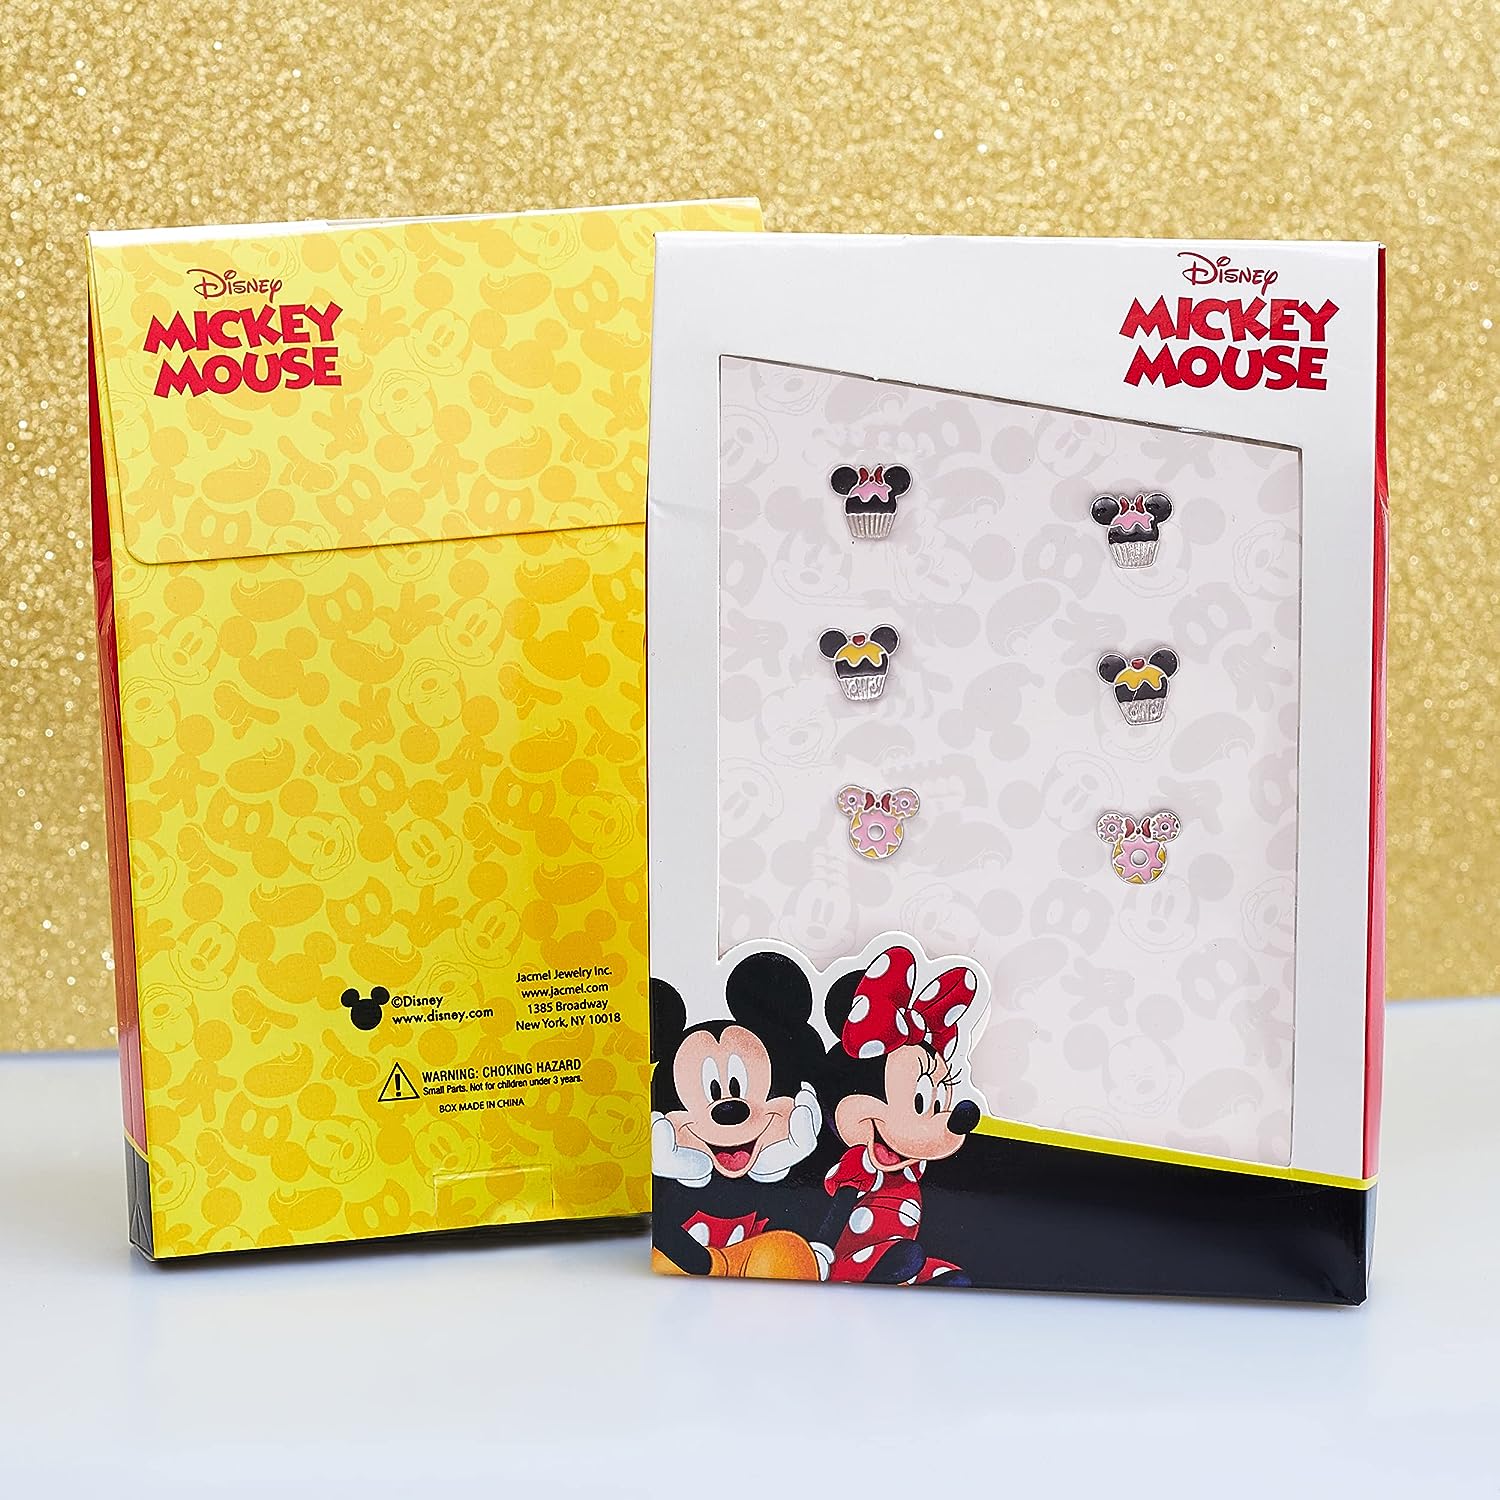 Disney Mickey and Minnie Mouse Fashion Stud Earring Set - 3/4/5 Pairs Per Set